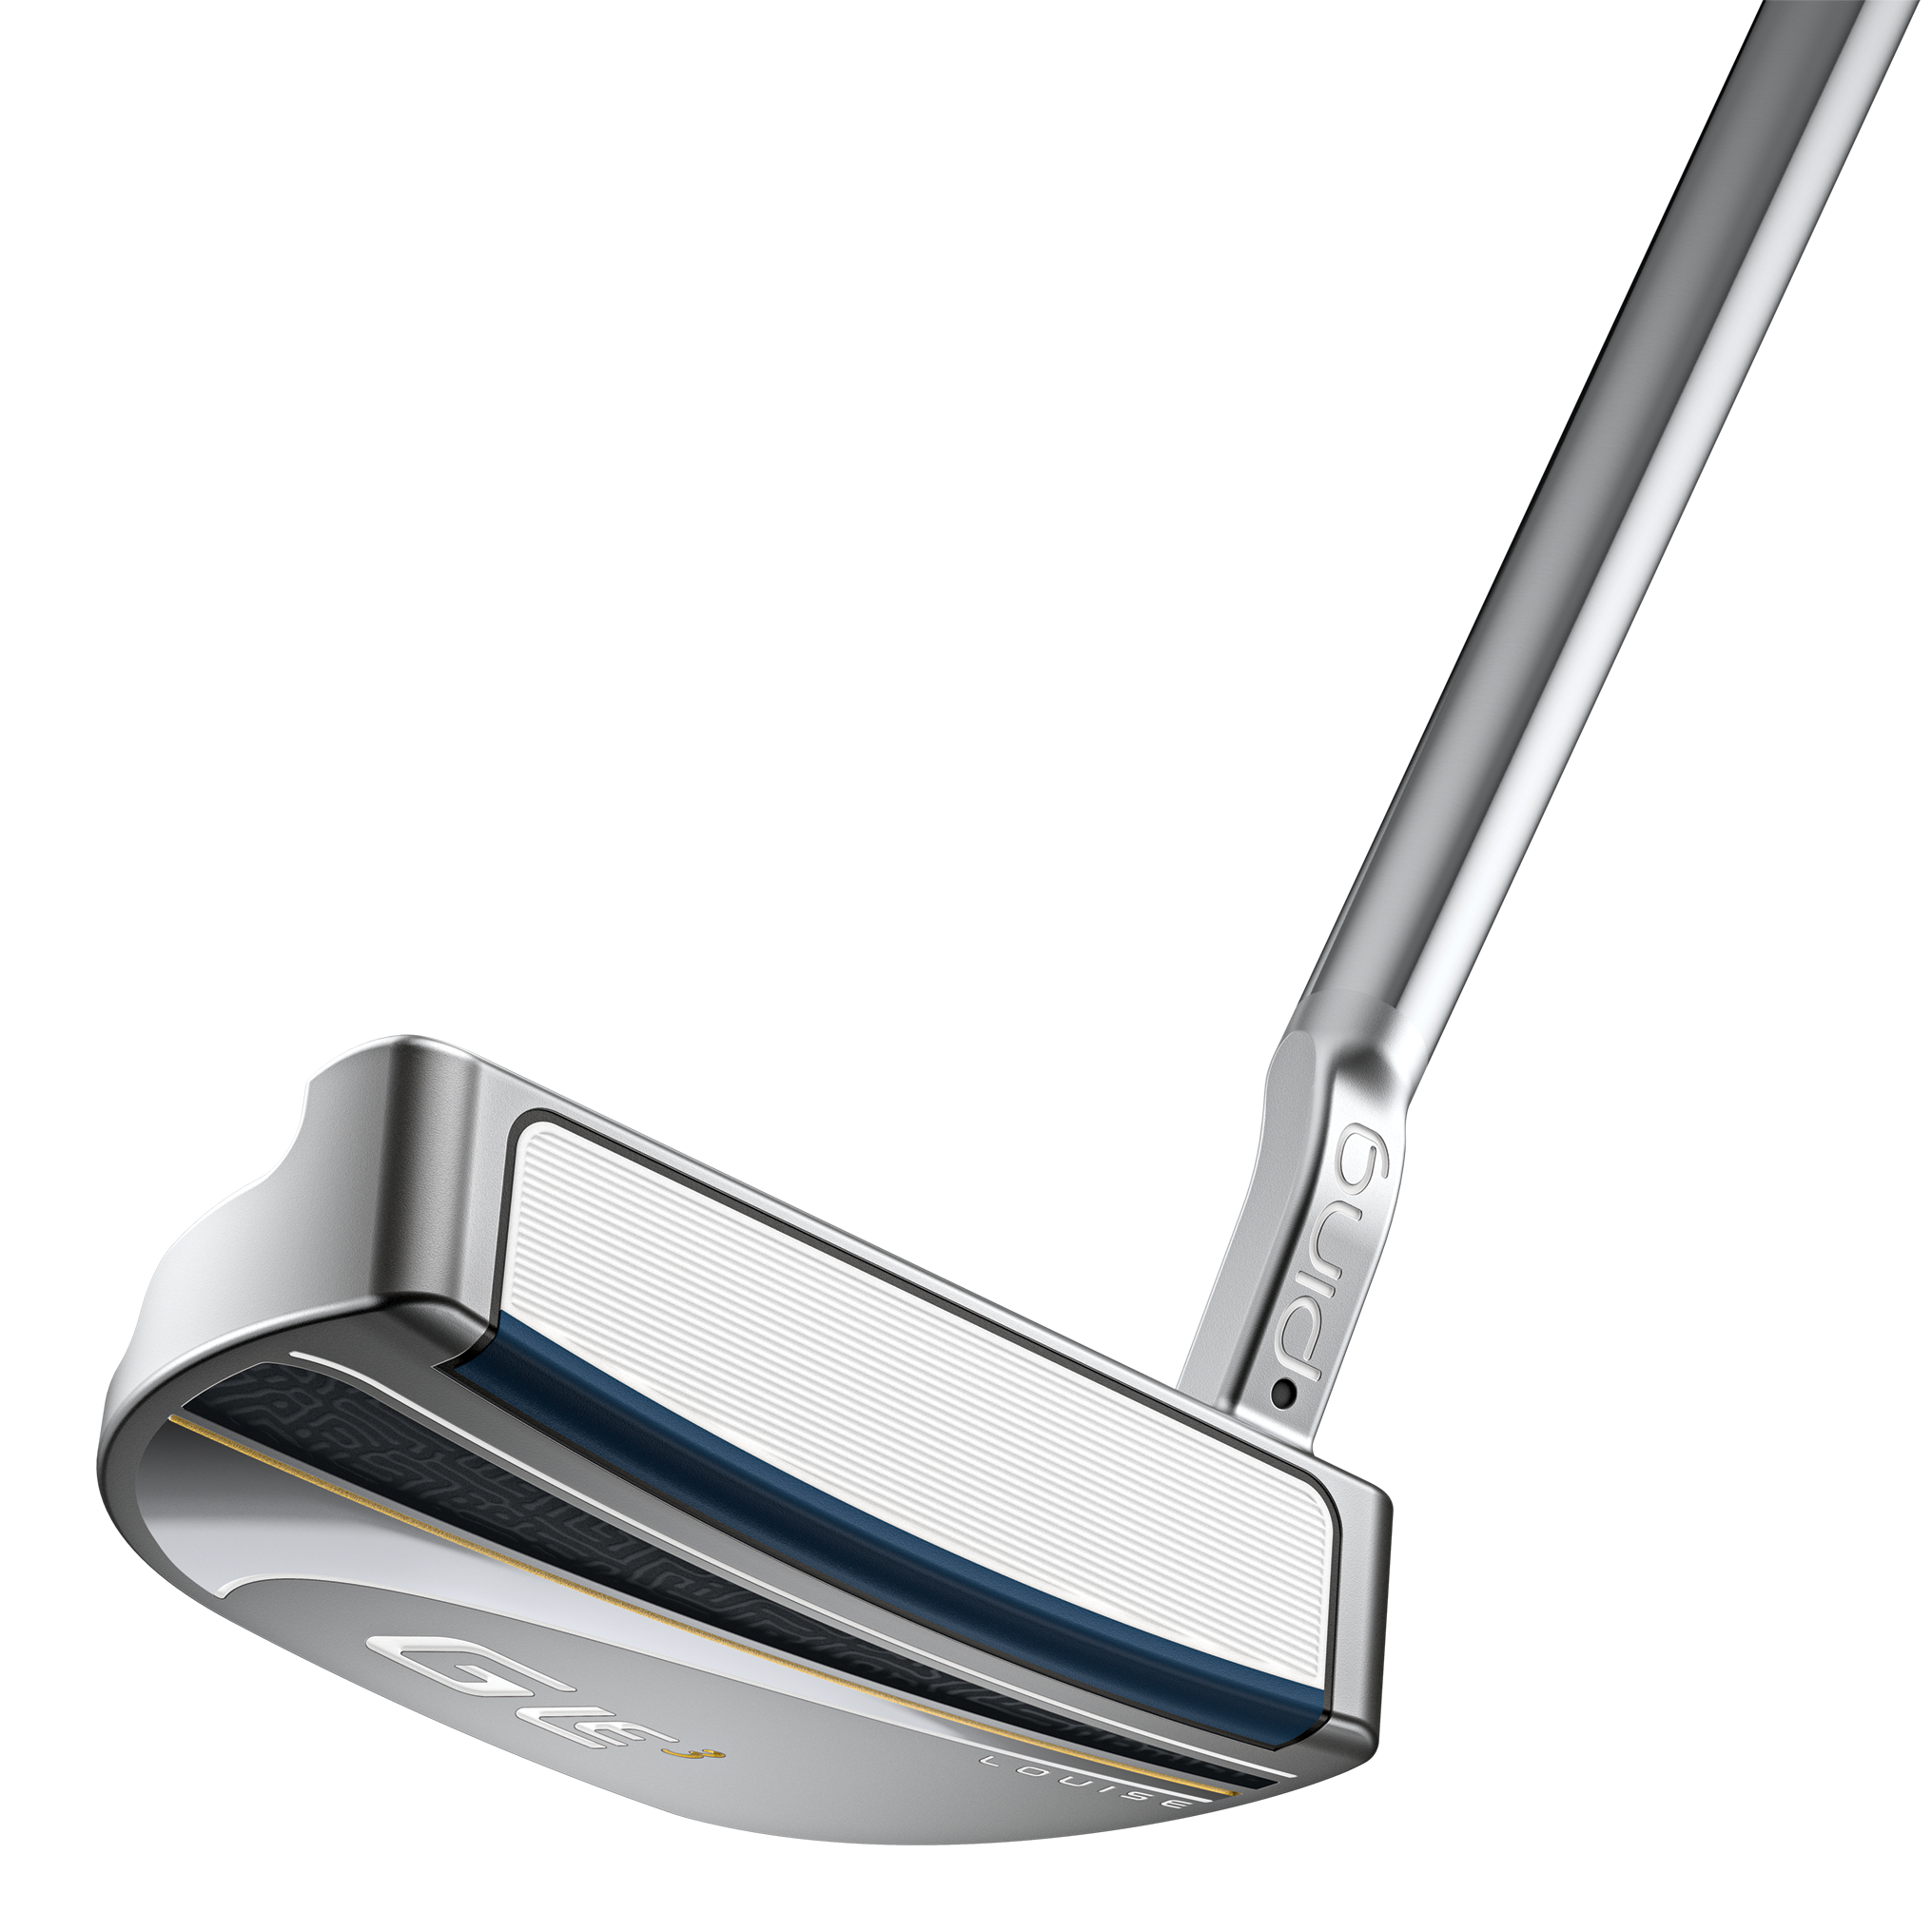 Ping G Le3 Women's Louise Golf Putter